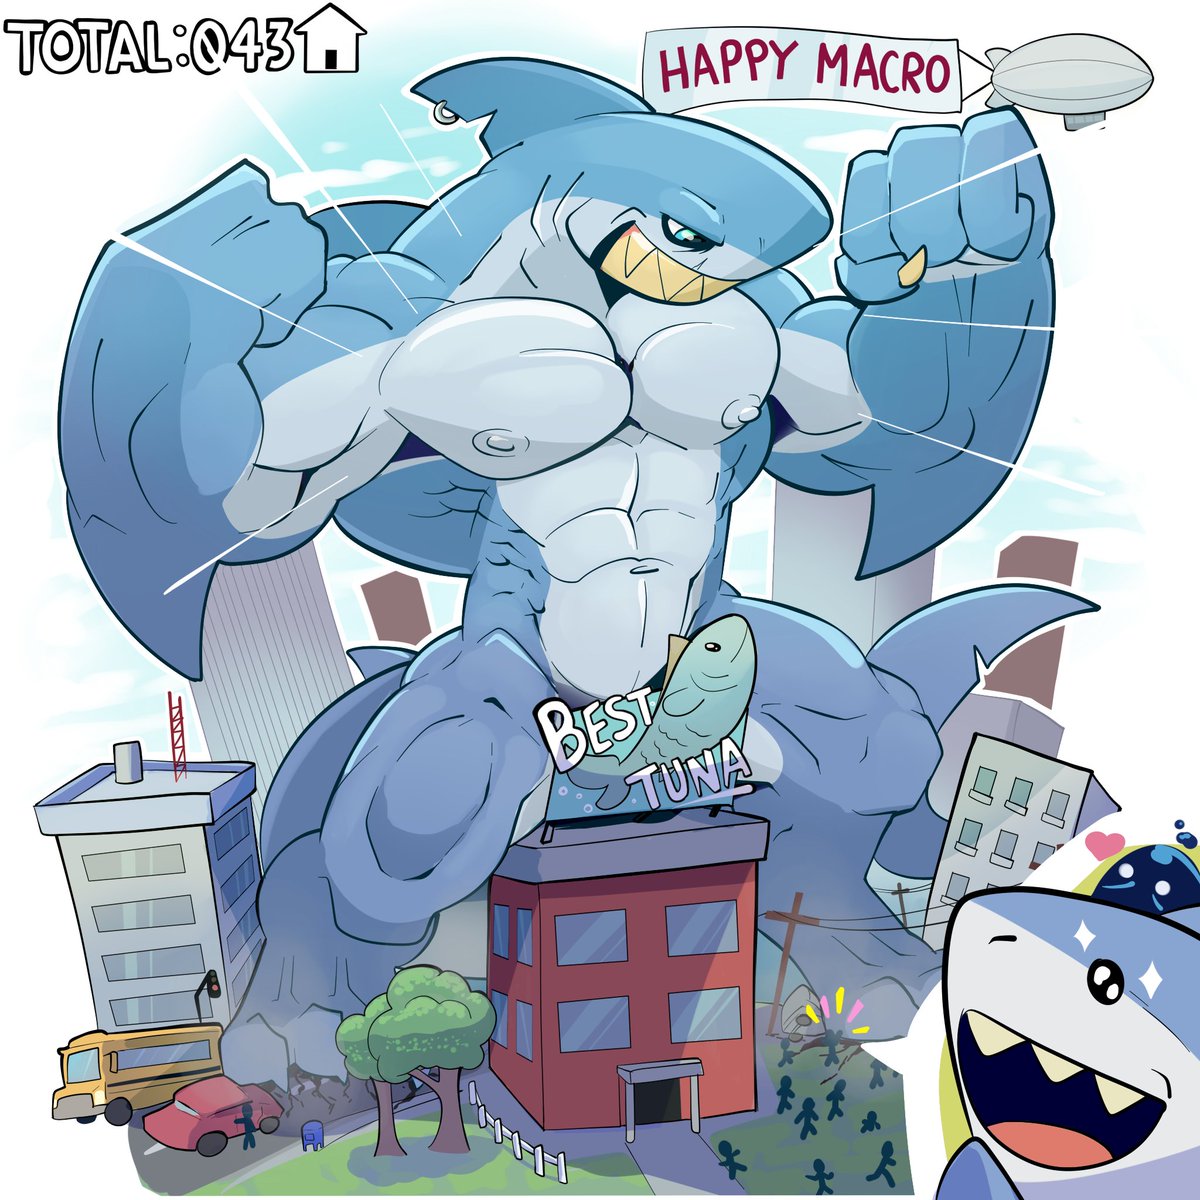 -Who wants more macro SHARK!? *From below can be heard the cheers* -SAY NO MORE, MIRAR A ESTE PROFESIONAL APLASTAR! -Big brother is always giving the best shows! -Take safe place lil bro and watch me! *Flexing his intense muscles, Grum's body is ready* 💪🦈 #MacroMarch #Sticker